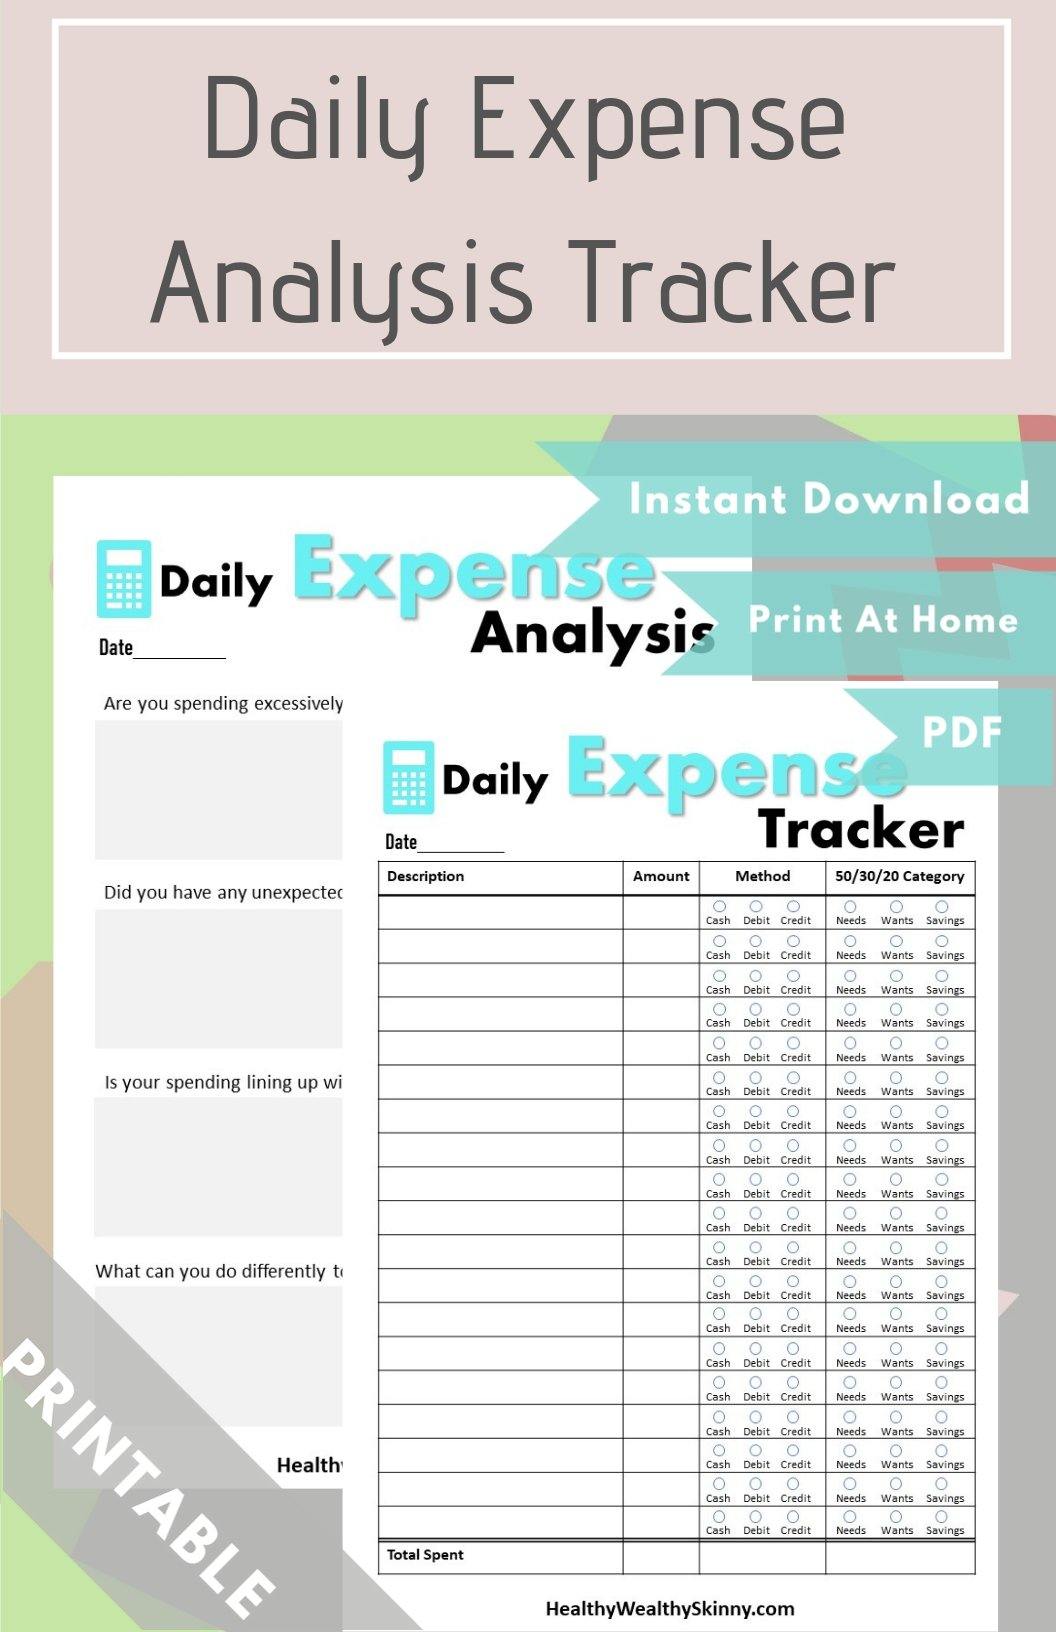 Daily Expense Tracker - Healthy Wealthy Skinny